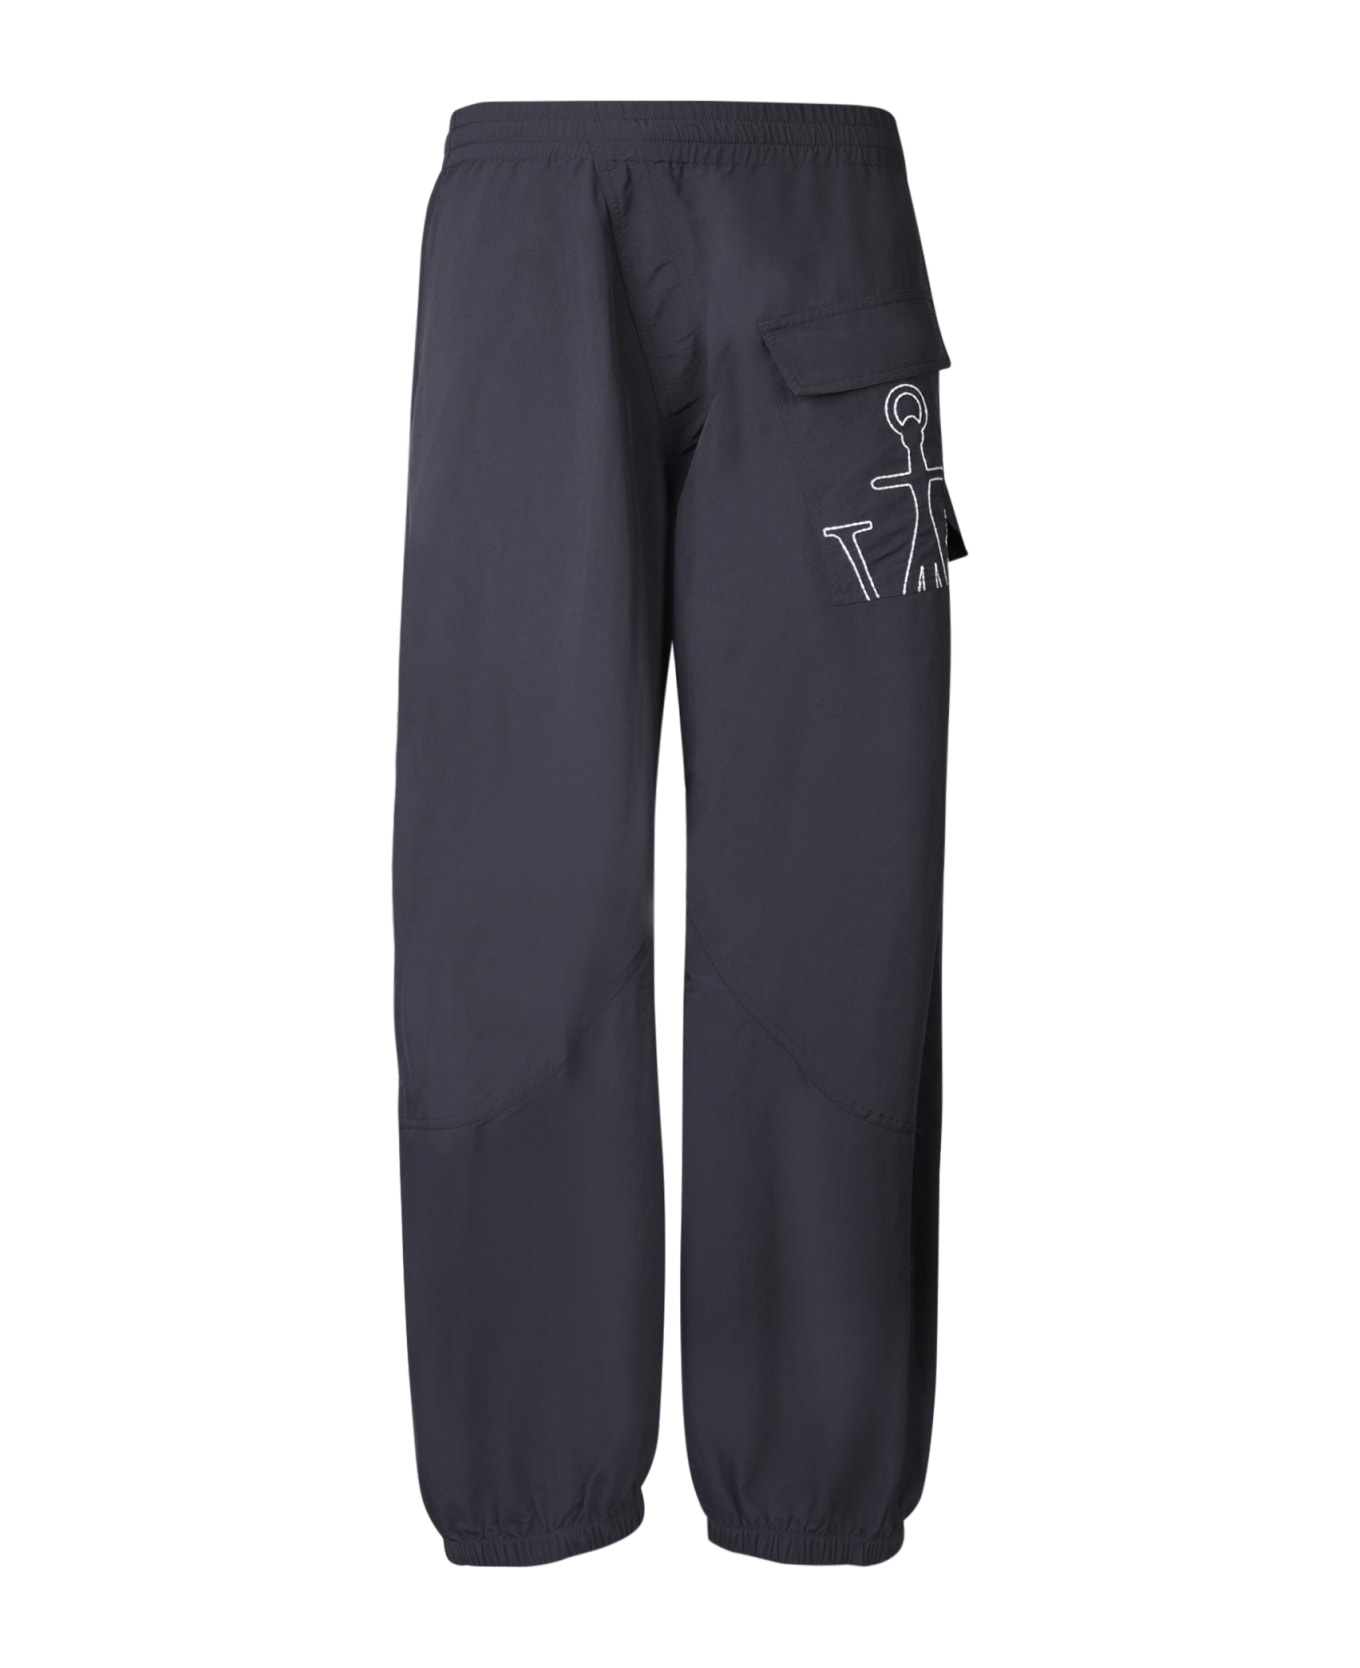 J.W. Anderson Twisted Jogger Pants - Black